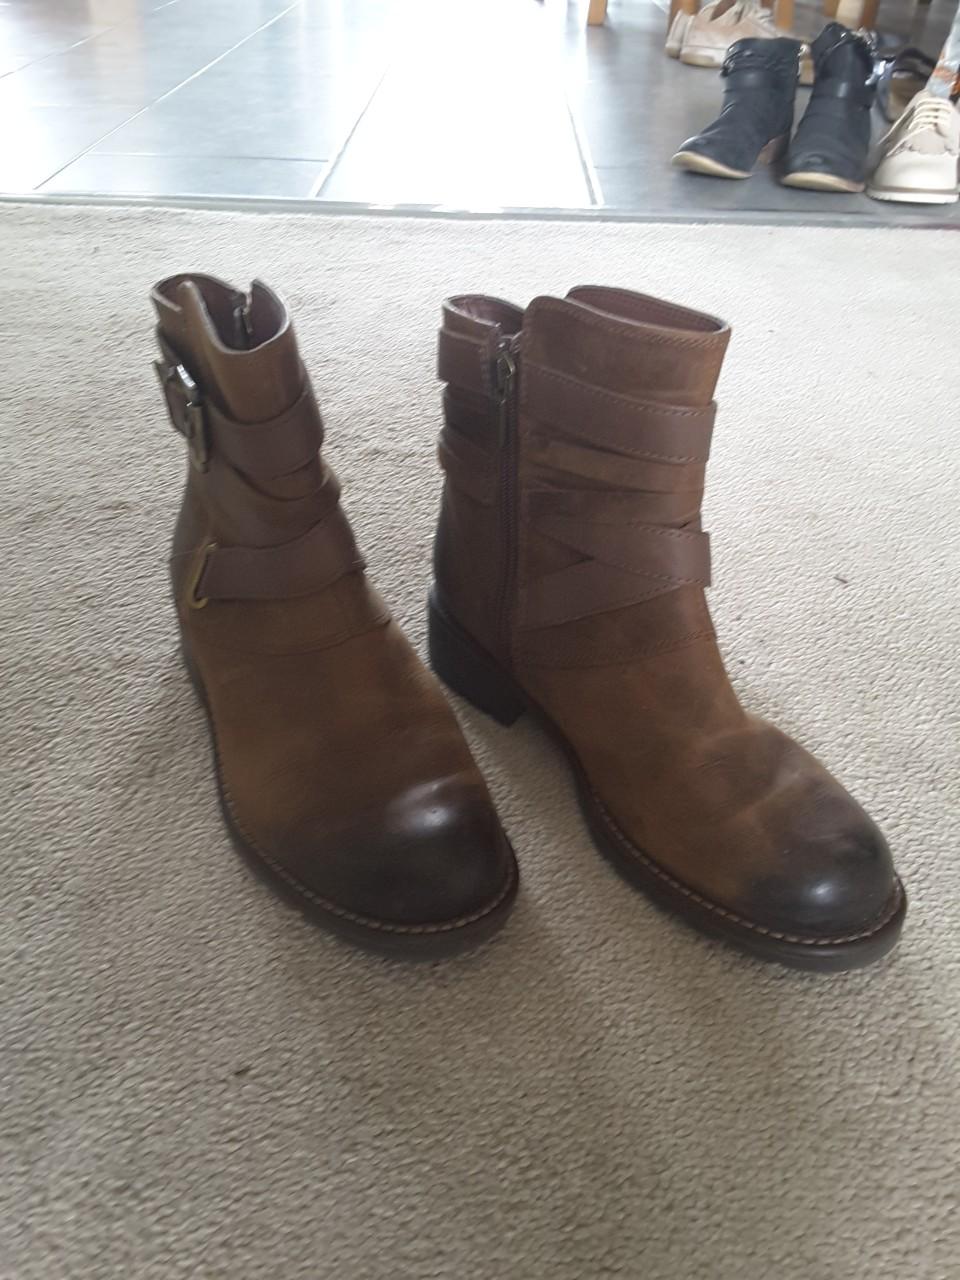 clarks ankle boots size 5